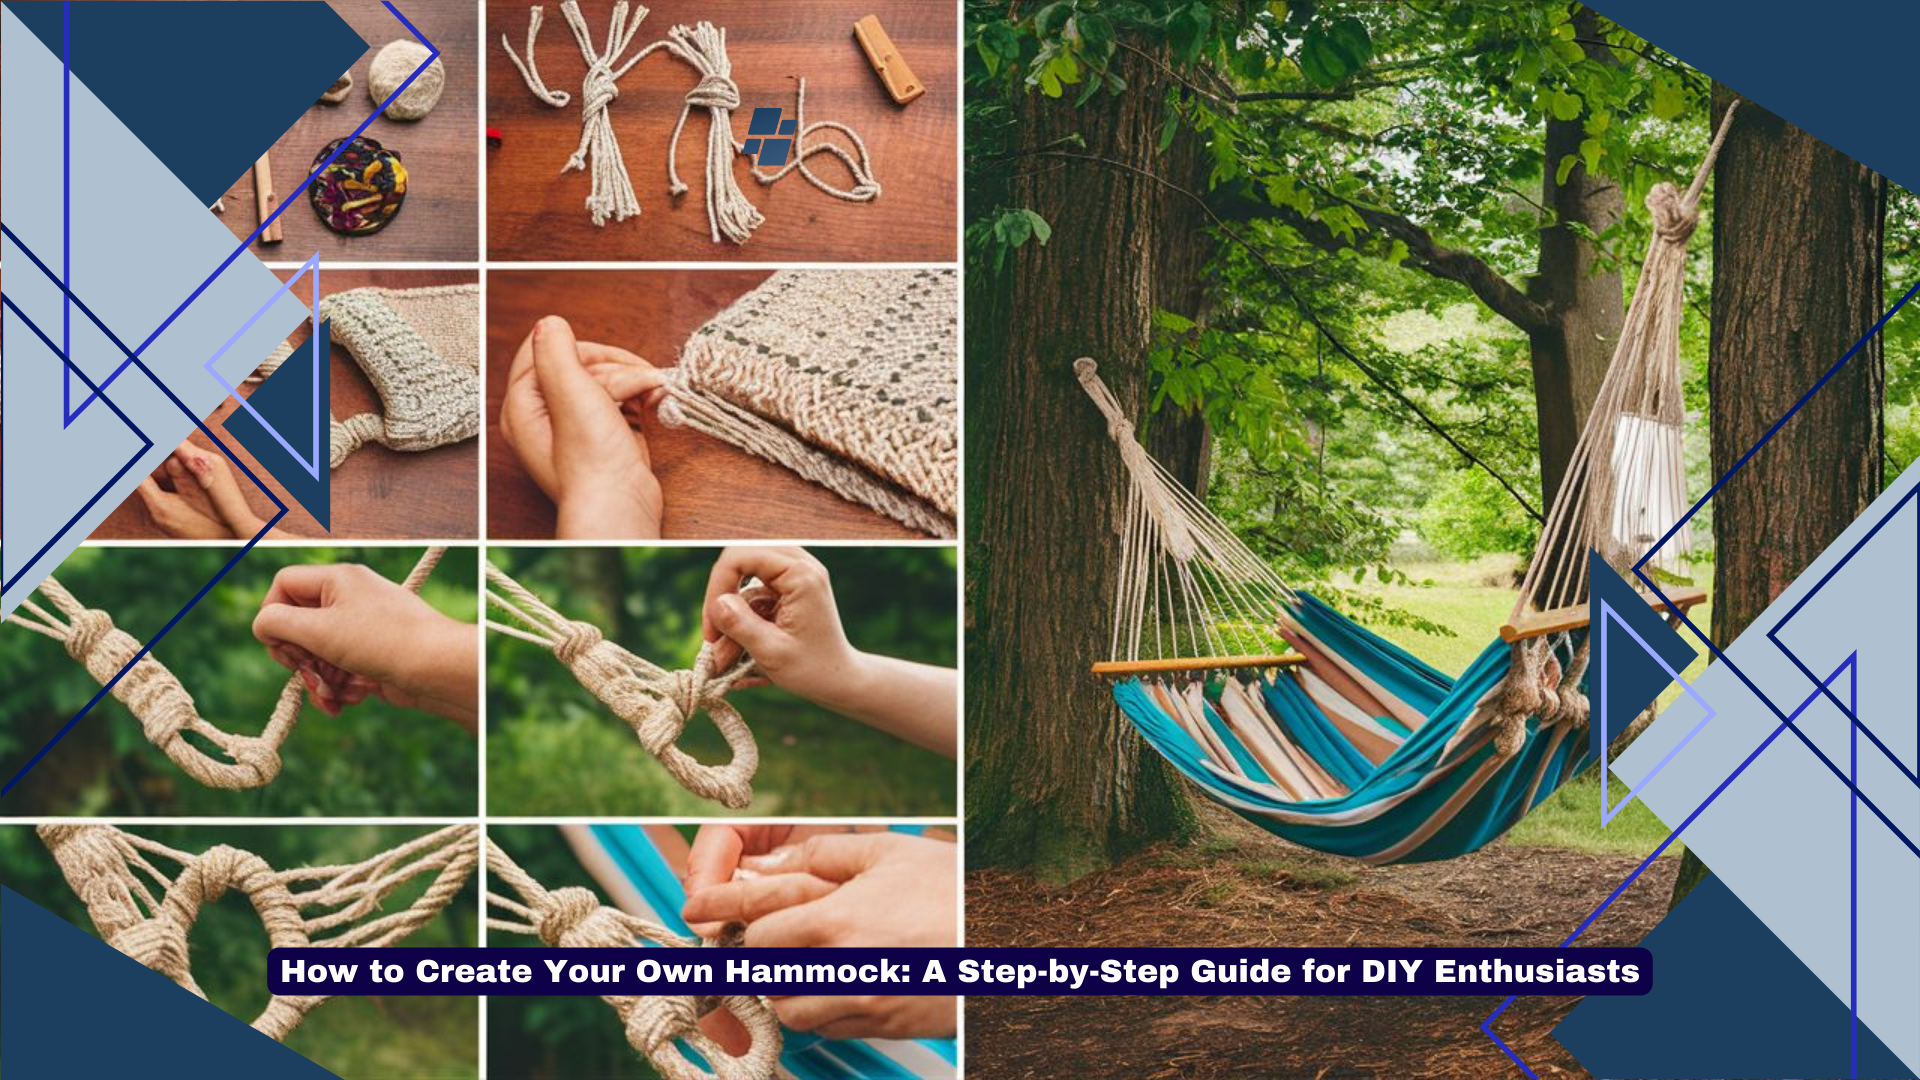 How to Create Your Own Hammock A Step-by-Step Guide for DIY Enthusiasts